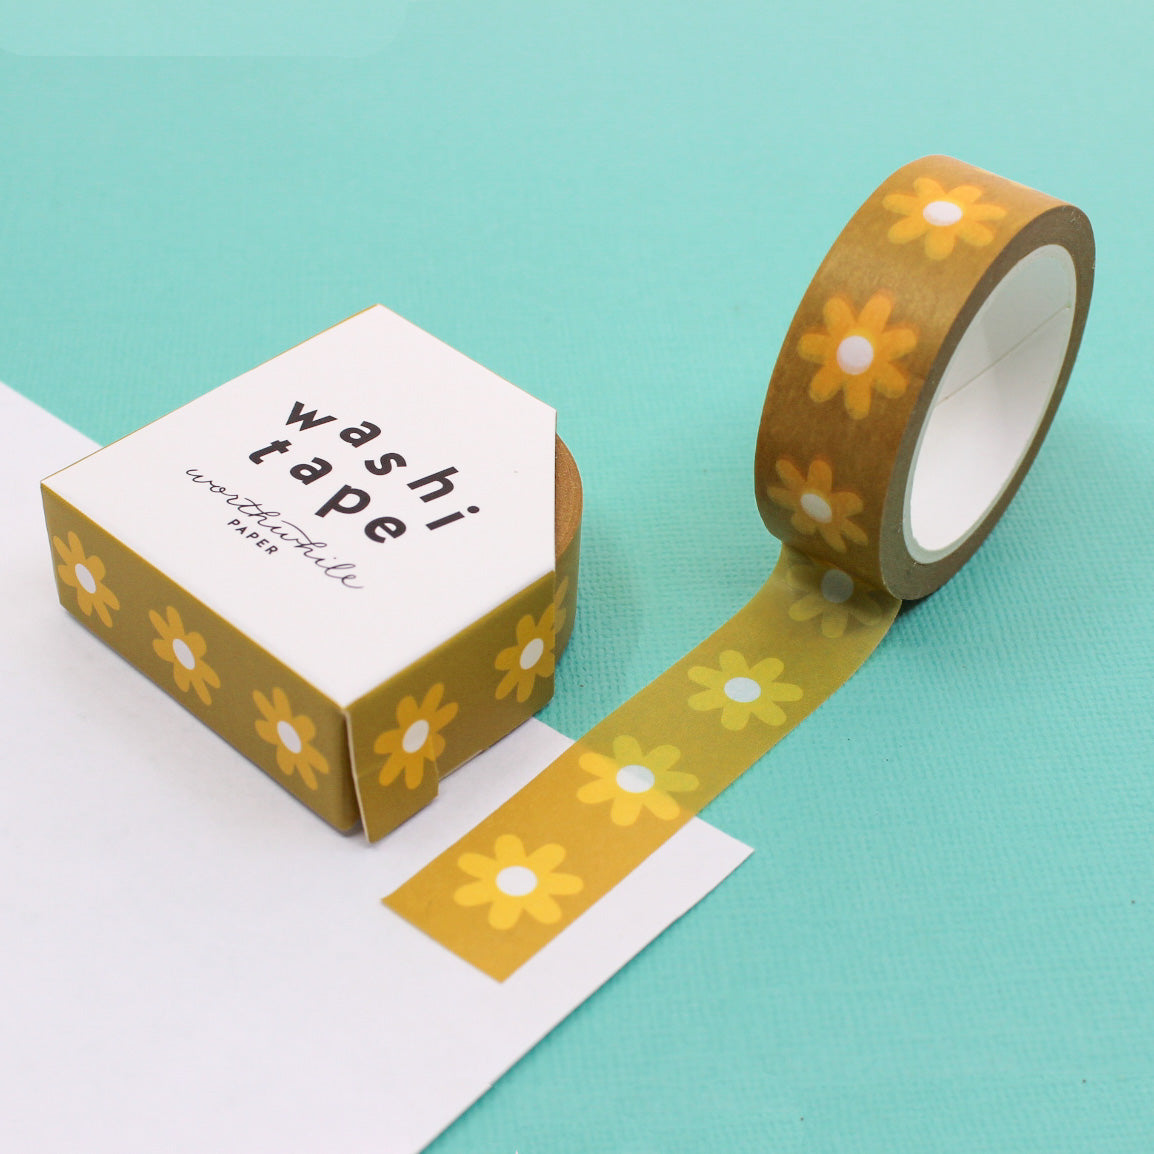 Yellow Daisy Motif Washi Tape, evoking nostalgia with its charming floral pattern, perfect for adding a touch of warmth and vintage flair to your projects. This tape is from Worthwhile Paper and sold at BBB Supplies Craft Shop.